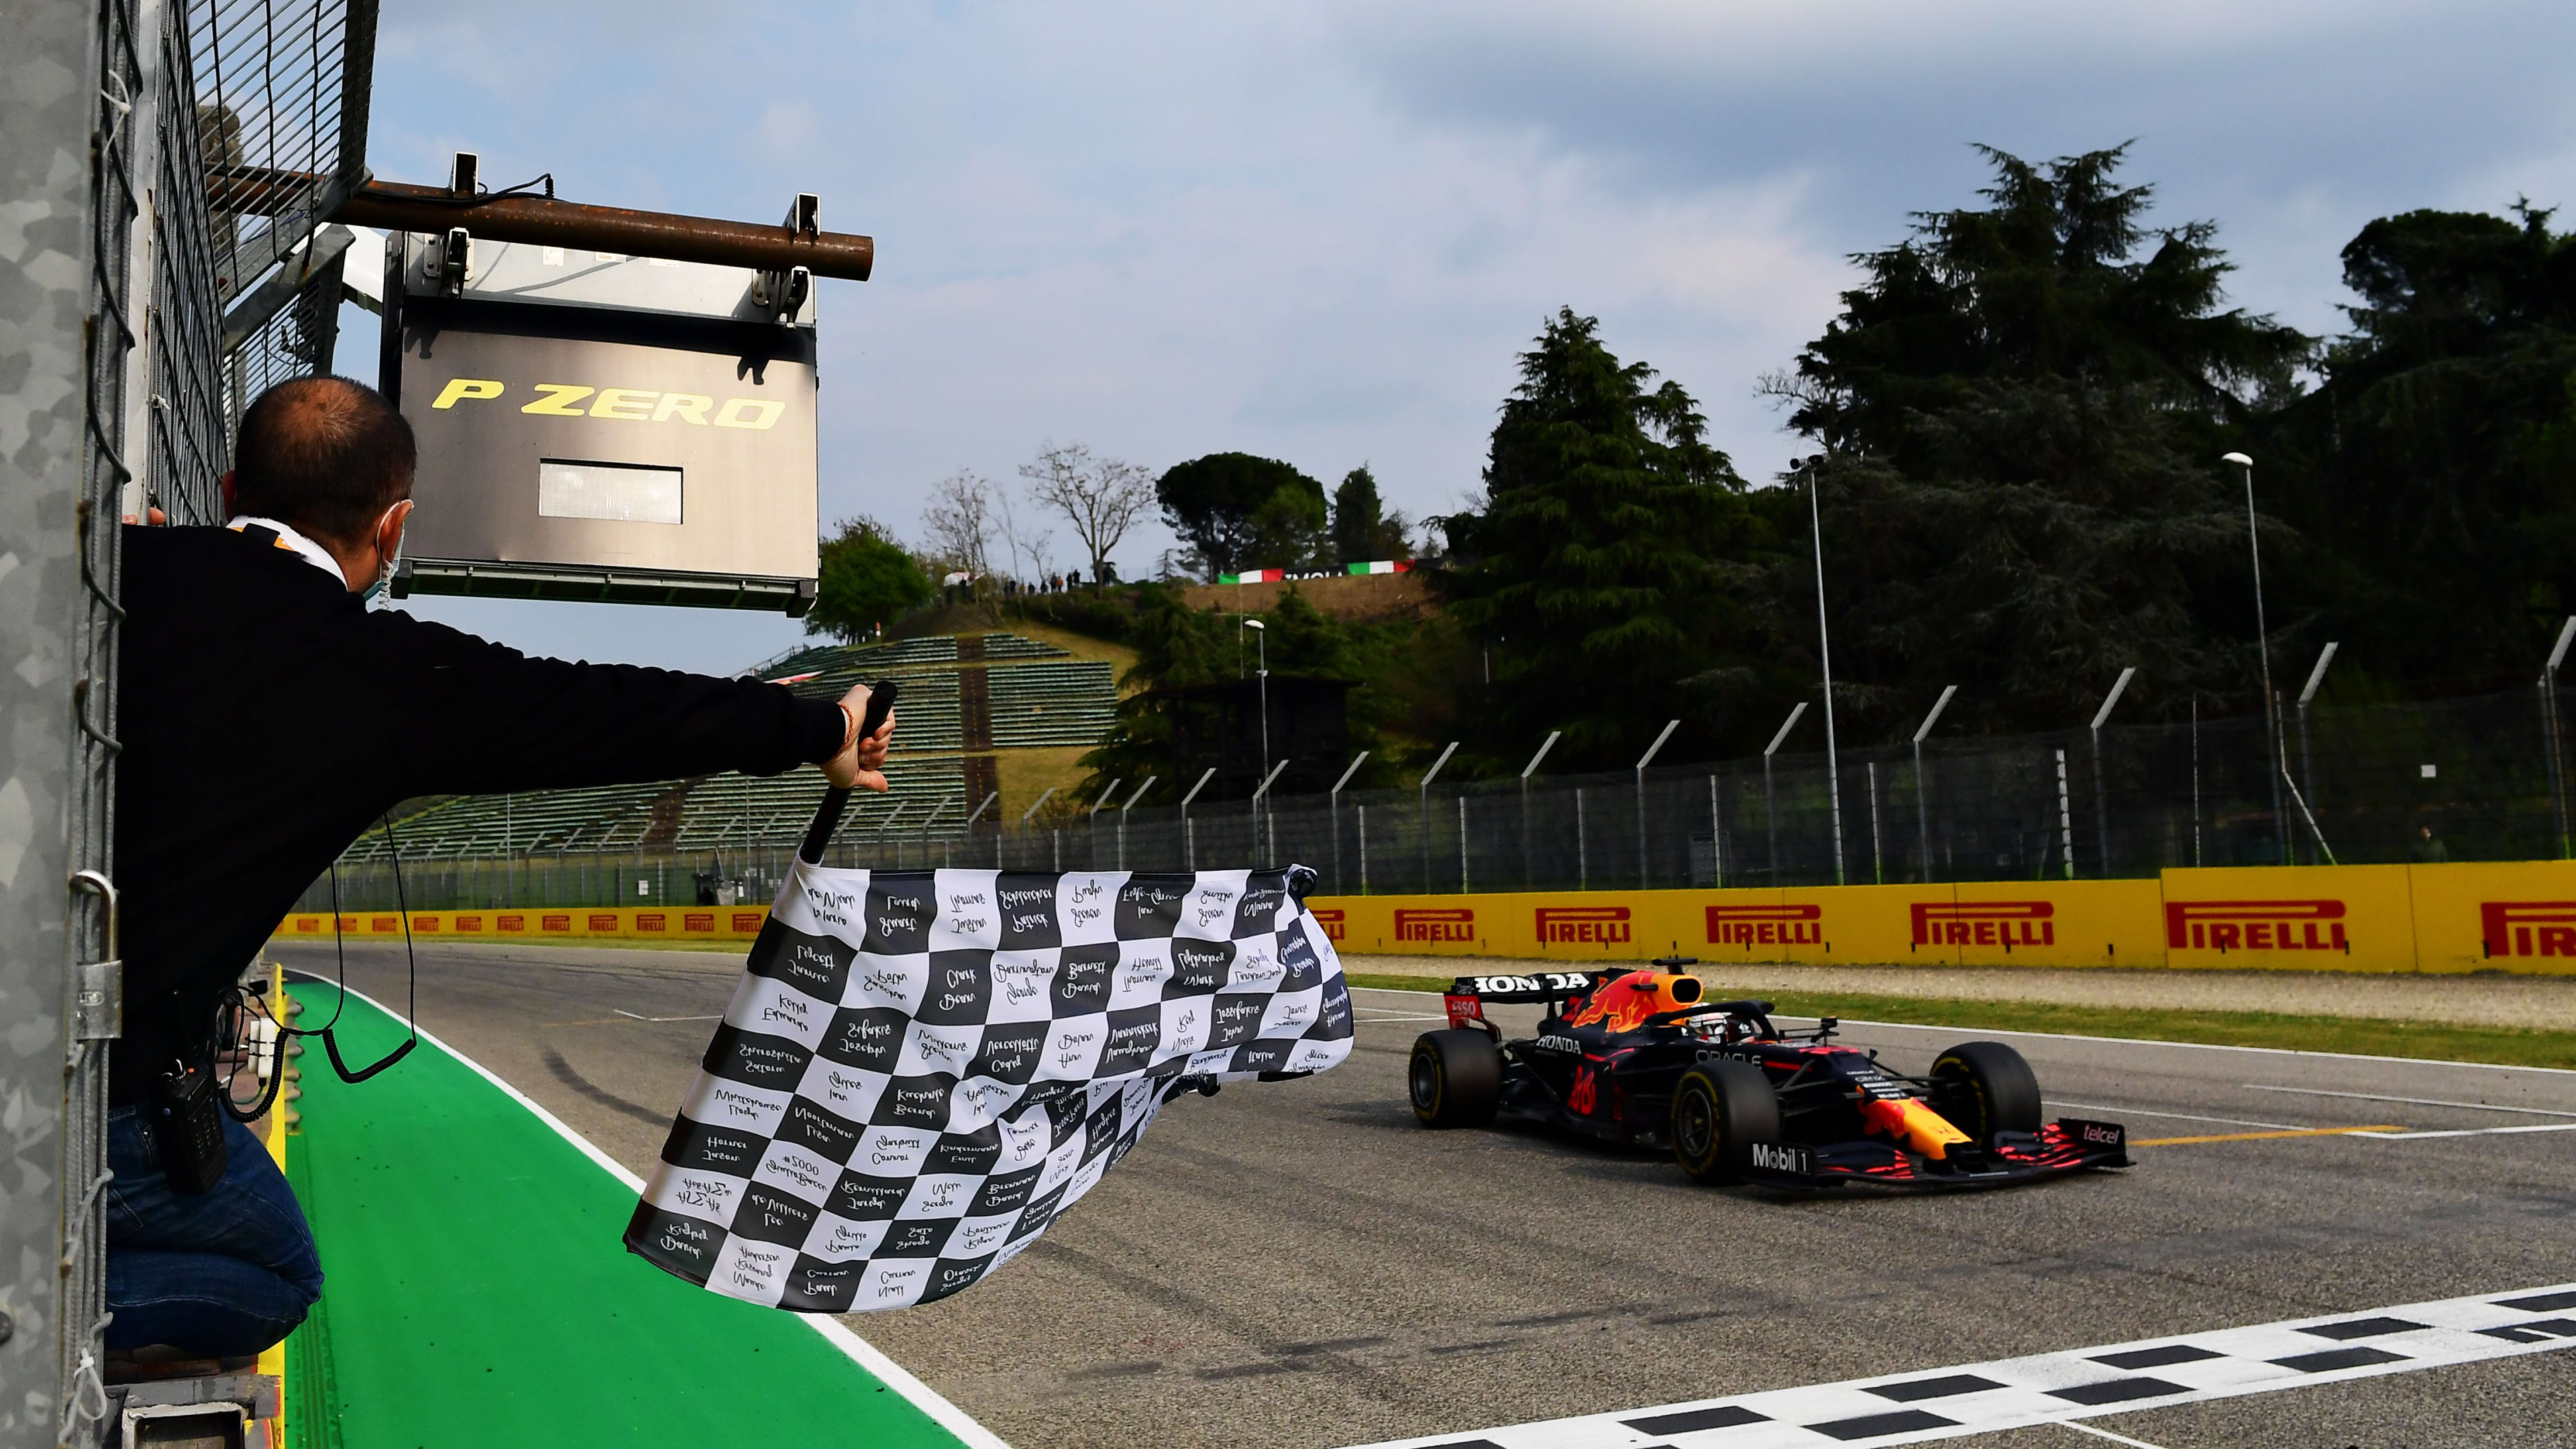 2021 Emilia Romagna Grand Prix race report and highlights Max Verstappen takes victory from Hamilton and Norris in action-packed Grand Prix at Imola Formula 1®